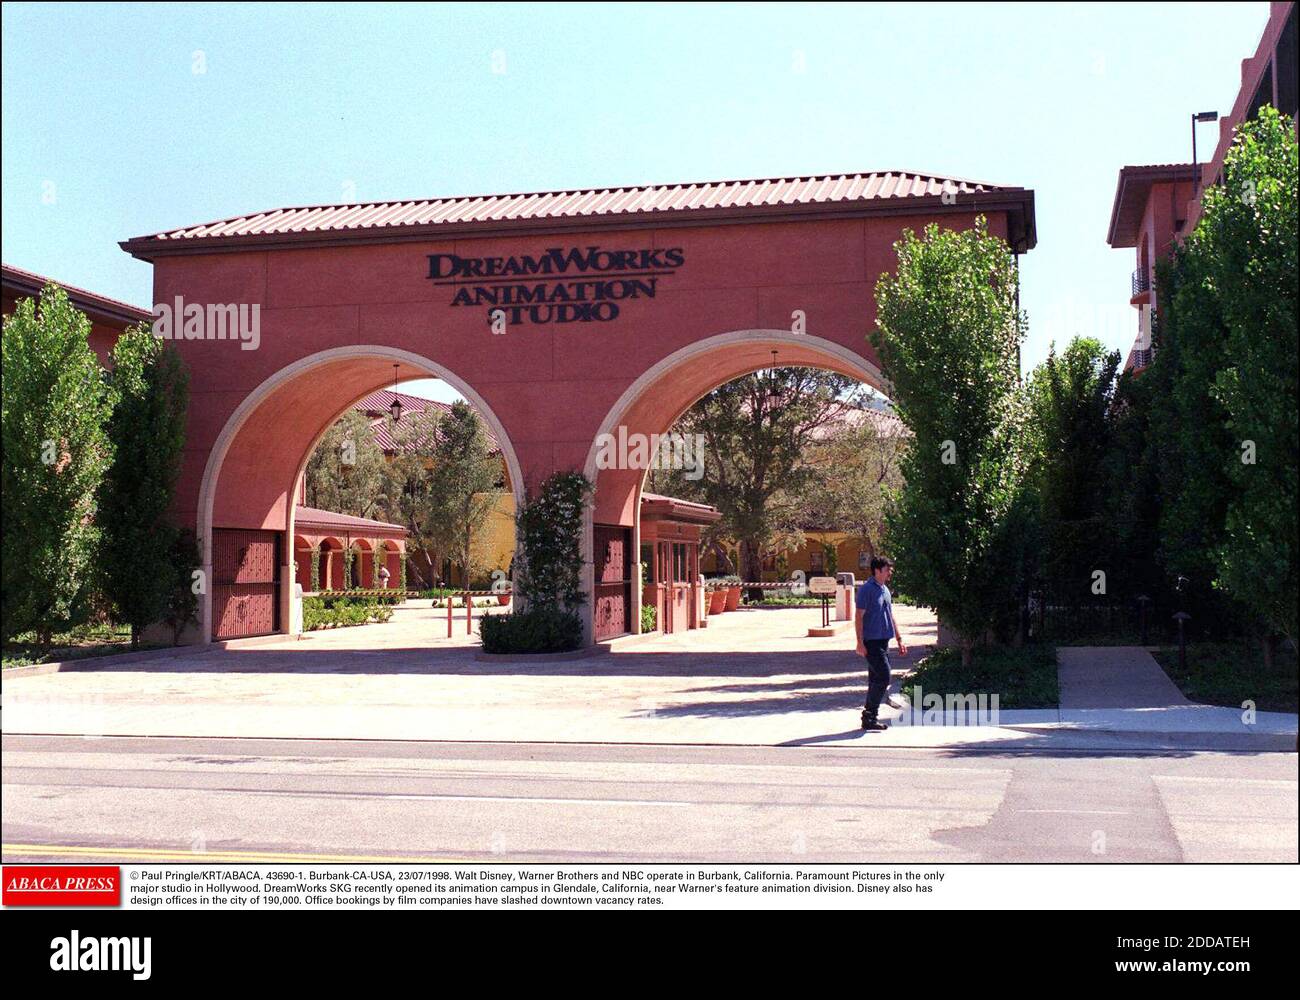 NO FILM, NO VIDEO, NO TV, NO DOCUMENTARY - © Paul Pringle/KRT/ABACA. 43690-1. Burbank-CA-USA, 23/07/1998. Walt Disney, Warner Brothers and NBC operate in Burbank, California. Paramount Pictures in the onlymajor studio in Hollywood. DreamWorks SKG recently opened its animation campus in Glendale, C Stock Photo